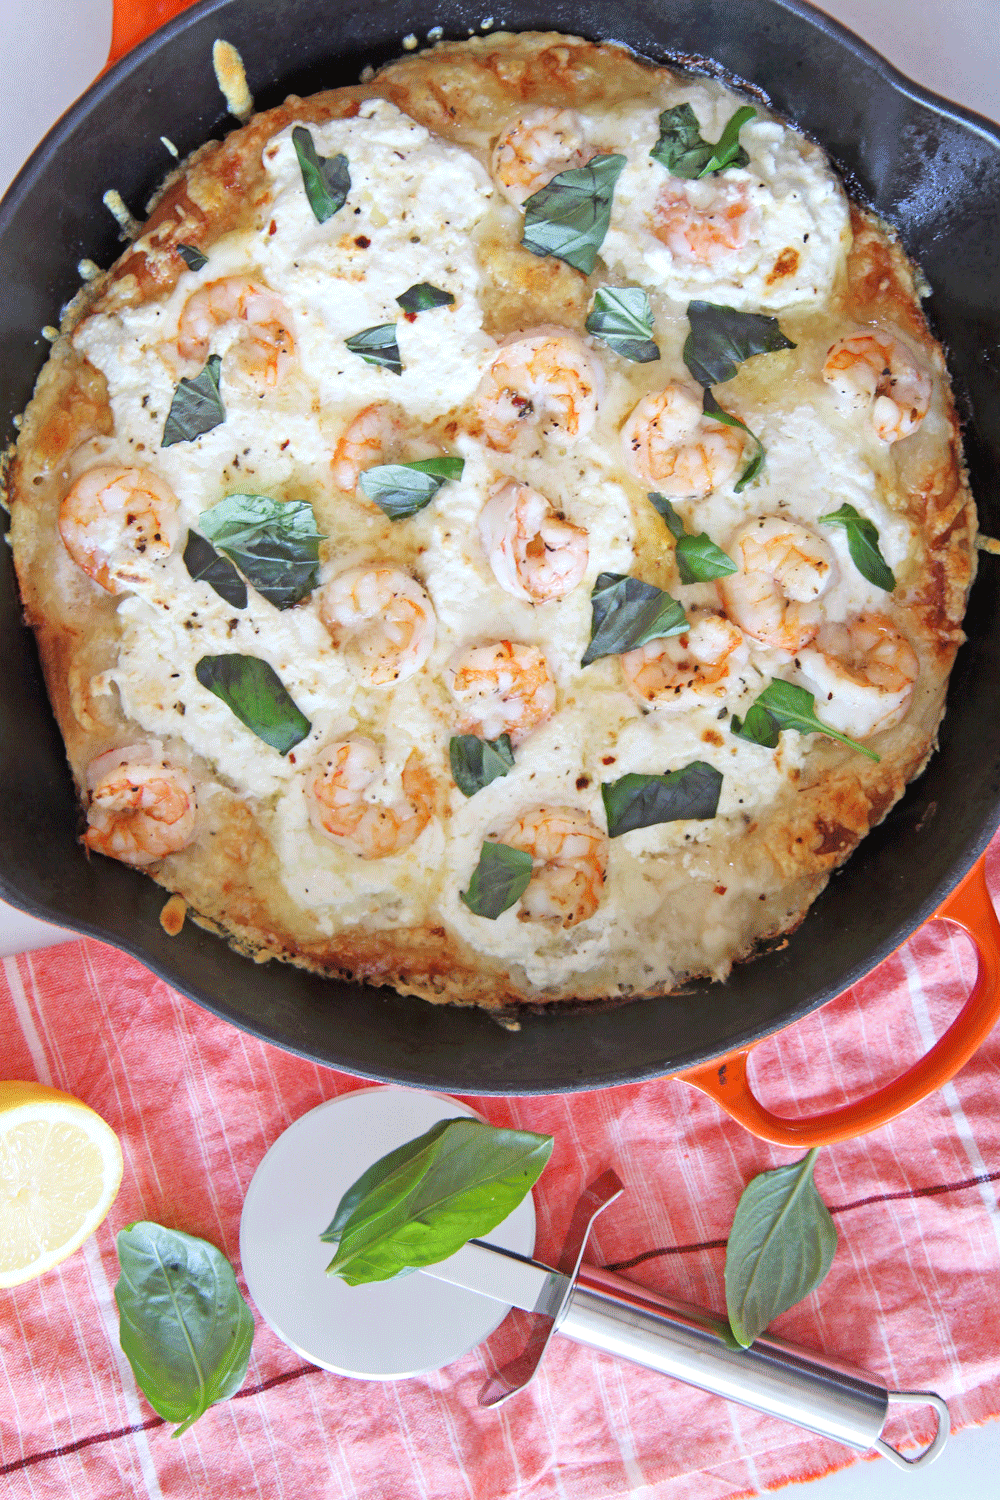 Shrimp Scampi Pizza in a Cast Iron Pan. This is the perfect one pan dinner that is done in 10 minutes. You cook the pizza in a cast iron pan for crispy cheesy crust. Happy Pizza Making! www.ChopHappy.com #Howtomakehomemadepizza #shrimpscampi